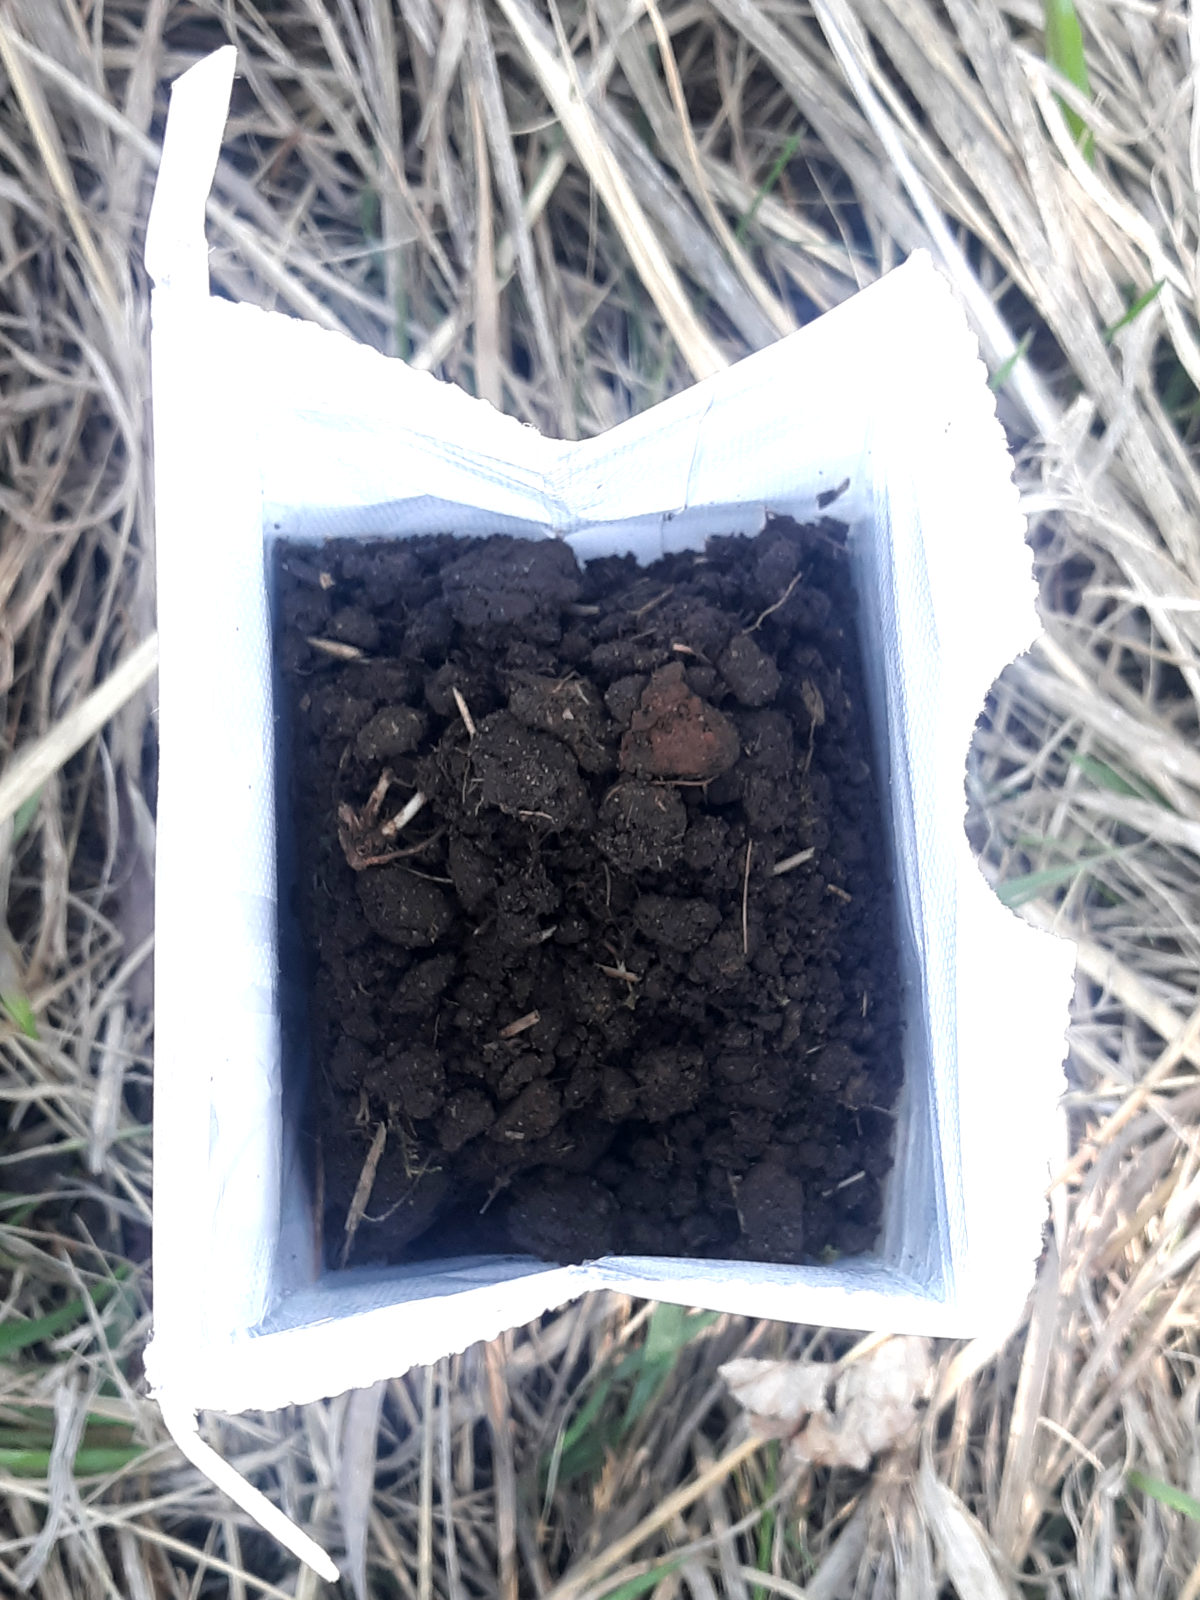 bag with soil sample in it